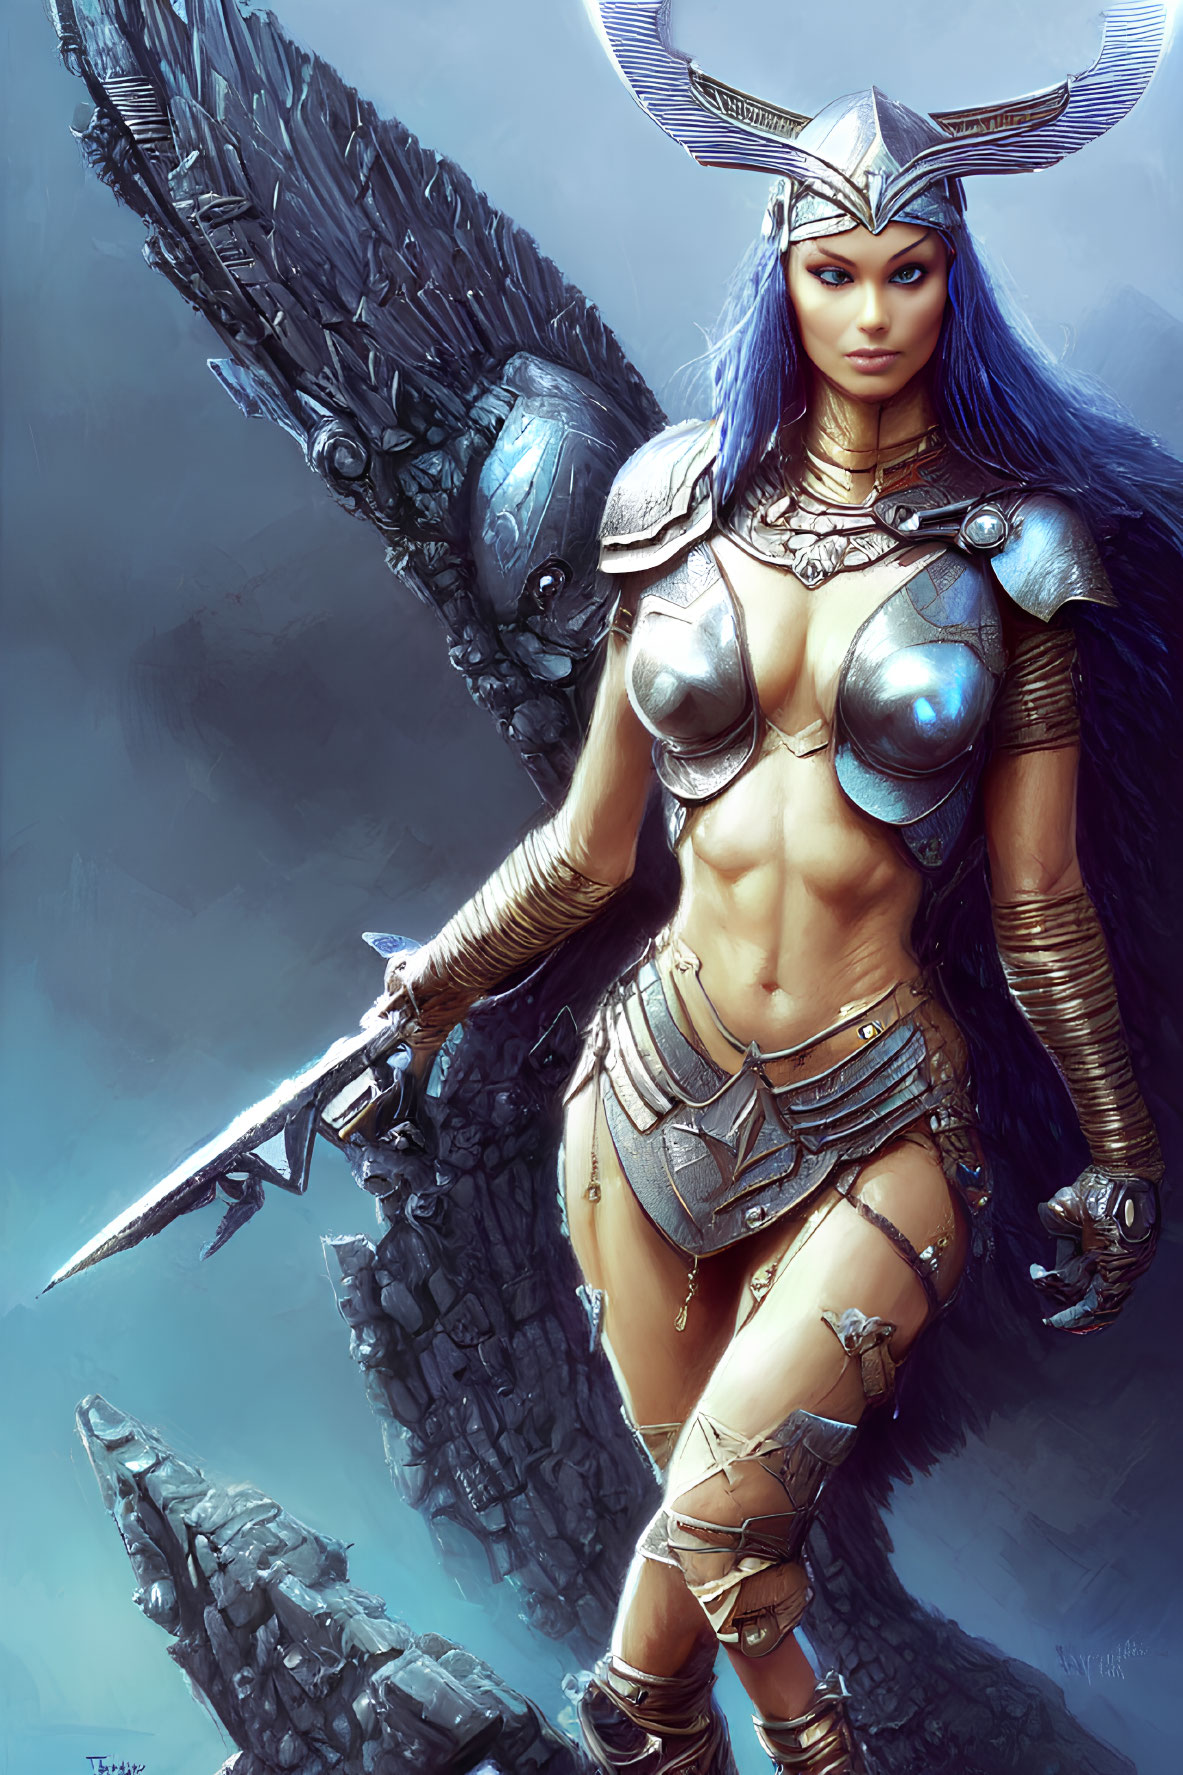 Blue-skinned fantasy warrior woman in silver armor with sword and winged helmet against feathered wings.